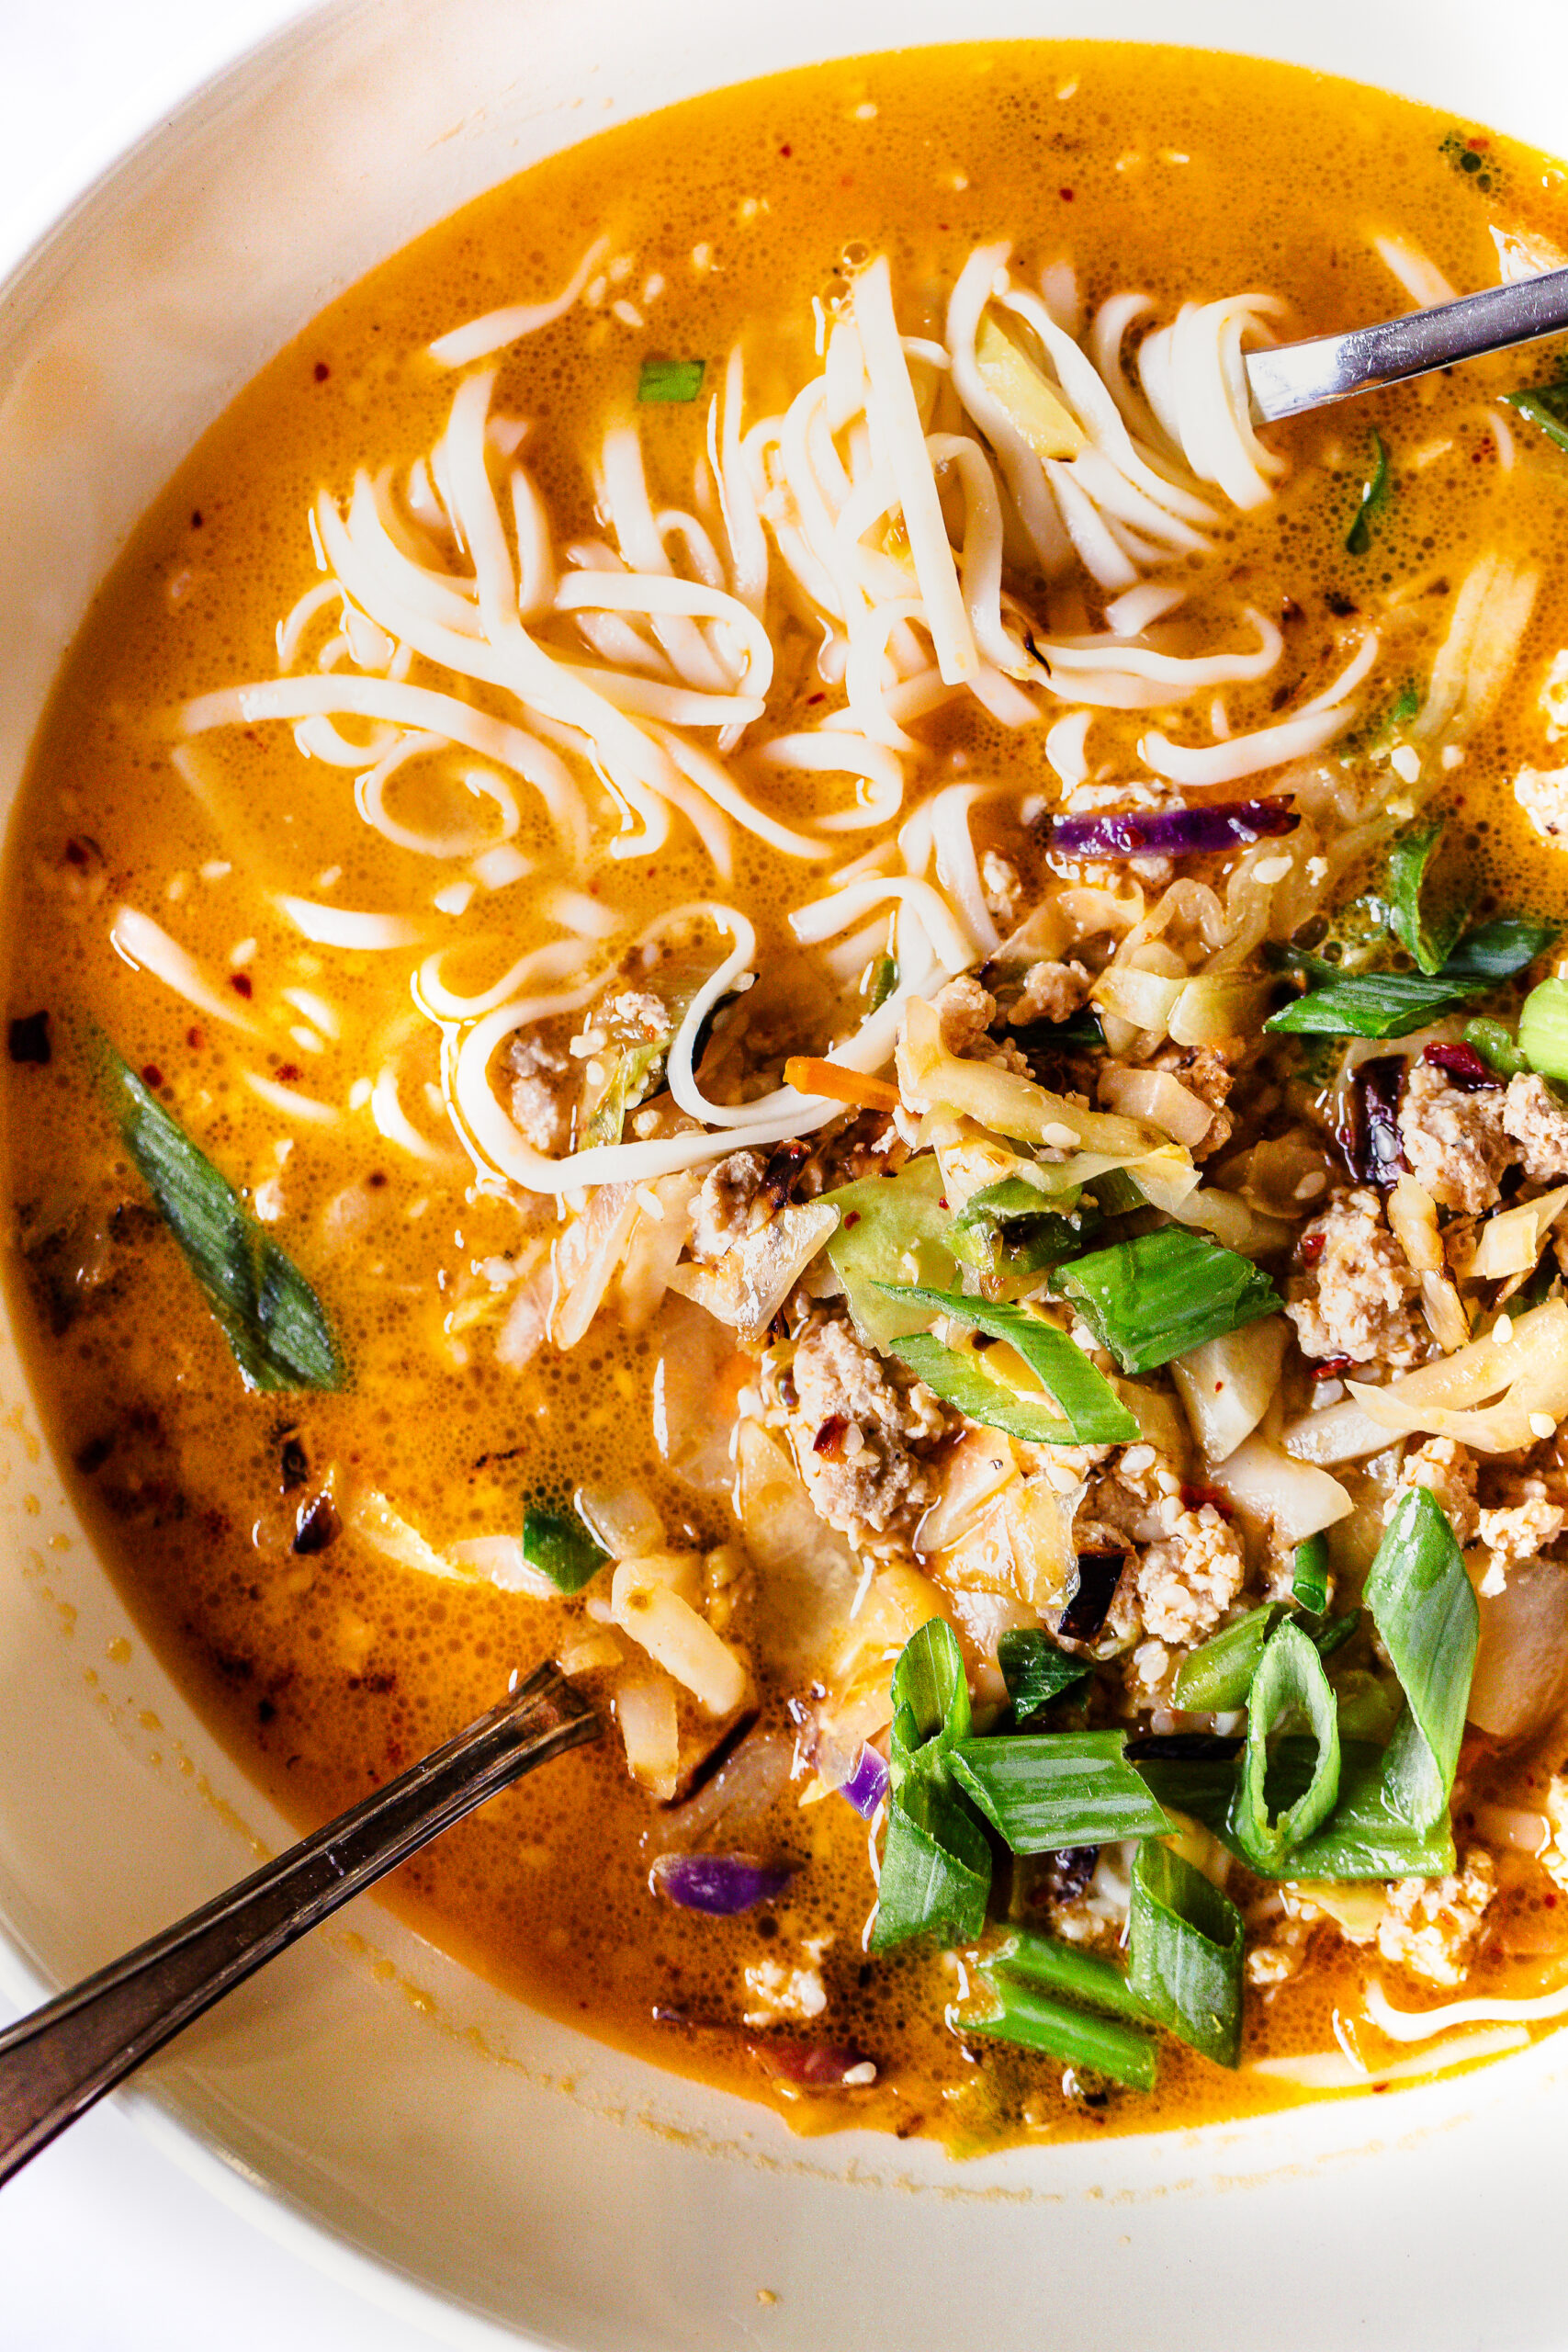 Easy Spicy Miso Noodles - The Foodie Takes Flight